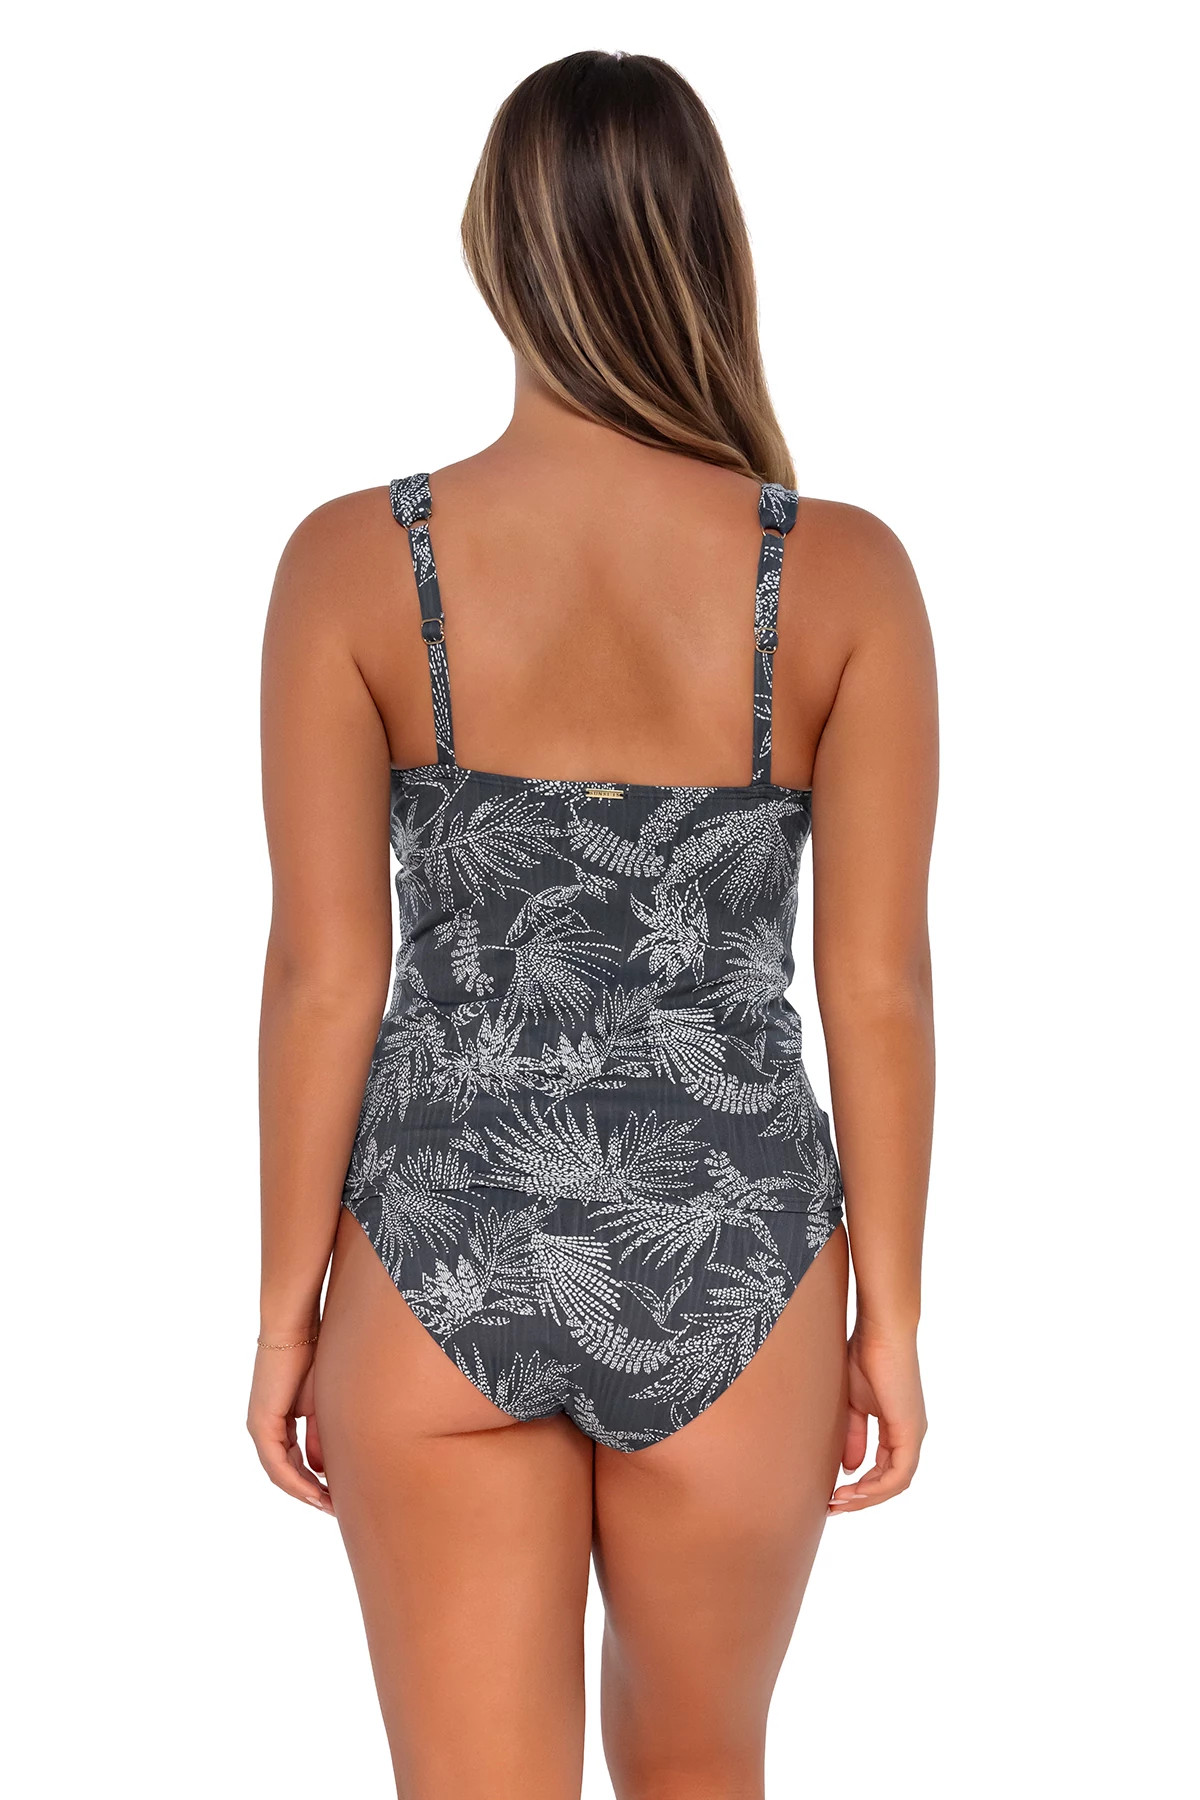 FANFARE SEAGRASS TEXTURE Elsie Underwire Tankini Top (D+ Cup) image number 2